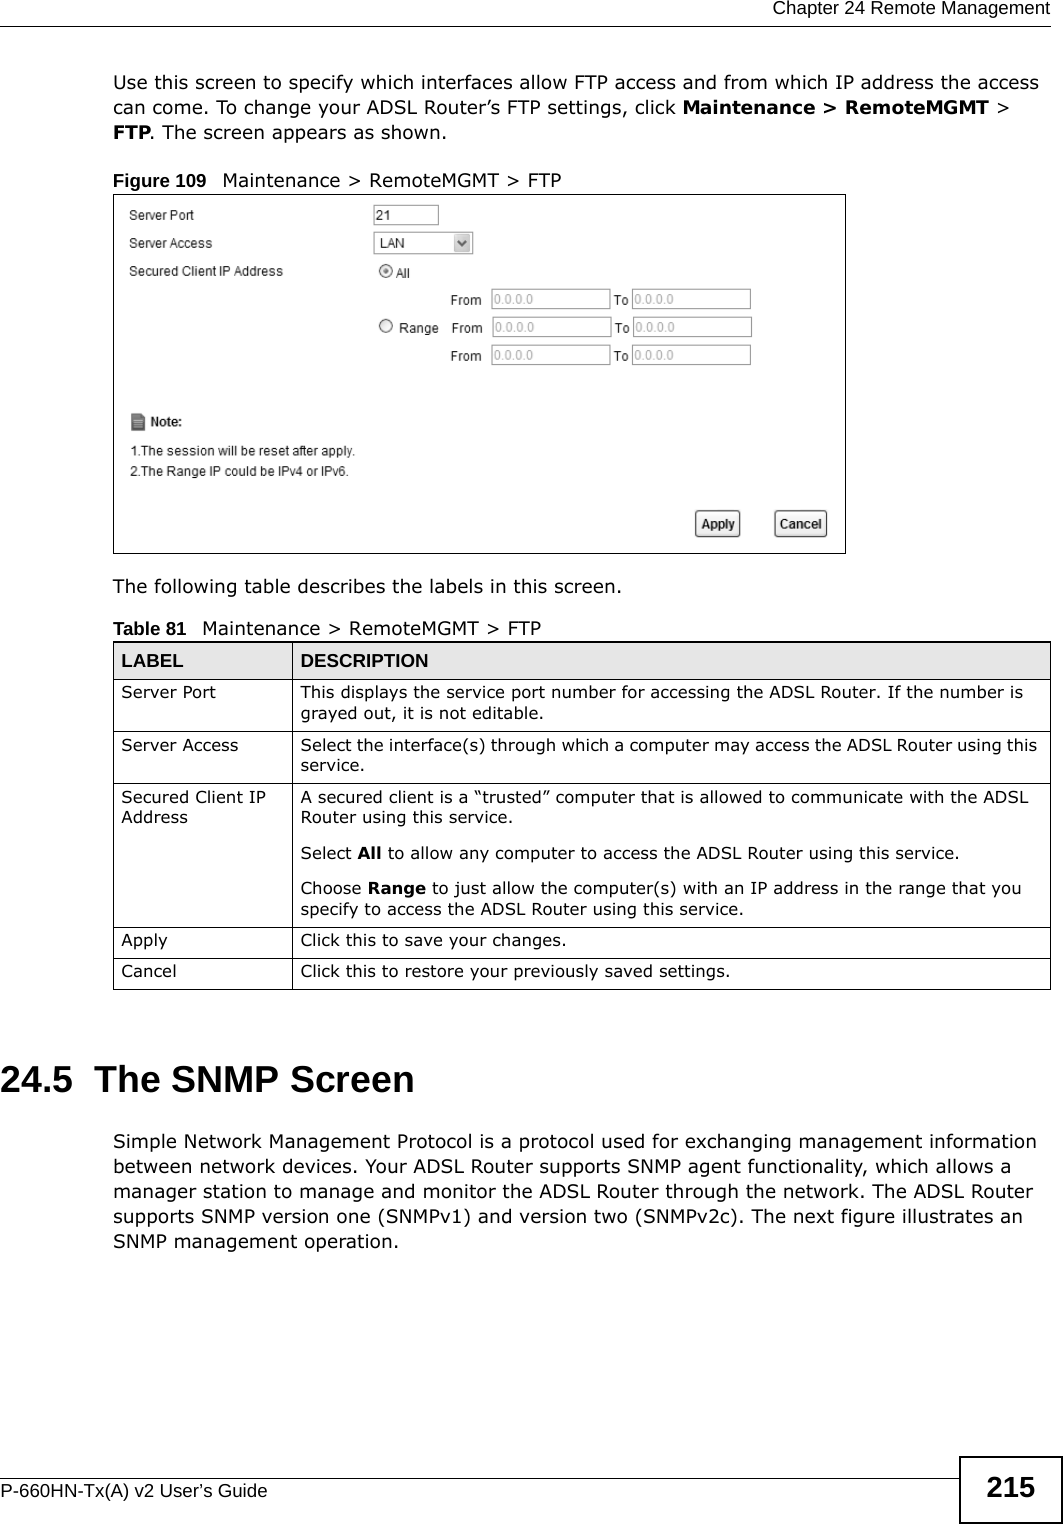  Chapter 24 Remote ManagementP-660HN-Tx(A) v2 User’s Guide 215Use this screen to specify which interfaces allow FTP access and from which IP address the access can come. To change your ADSL Router’s FTP settings, click Maintenance &gt; RemoteMGMT &gt; FTP. The screen appears as shown.Figure 109   Maintenance &gt; RemoteMGMT &gt; FTPThe following table describes the labels in this screen. 24.5  The SNMP ScreenSimple Network Management Protocol is a protocol used for exchanging management information between network devices. Your ADSL Router supports SNMP agent functionality, which allows a manager station to manage and monitor the ADSL Router through the network. The ADSL Router supports SNMP version one (SNMPv1) and version two (SNMPv2c). The next figure illustrates an SNMP management operation.Table 81   Maintenance &gt; RemoteMGMT &gt; FTPLABEL DESCRIPTIONServer Port This displays the service port number for accessing the ADSL Router. If the number is grayed out, it is not editable.Server Access Select the interface(s) through which a computer may access the ADSL Router using this service.Secured Client IP AddressA secured client is a “trusted” computer that is allowed to communicate with the ADSL Router using this service. Select All to allow any computer to access the ADSL Router using this service.Choose Range to just allow the computer(s) with an IP address in the range that you specify to access the ADSL Router using this service.Apply Click this to save your changes.Cancel Click this to restore your previously saved settings.